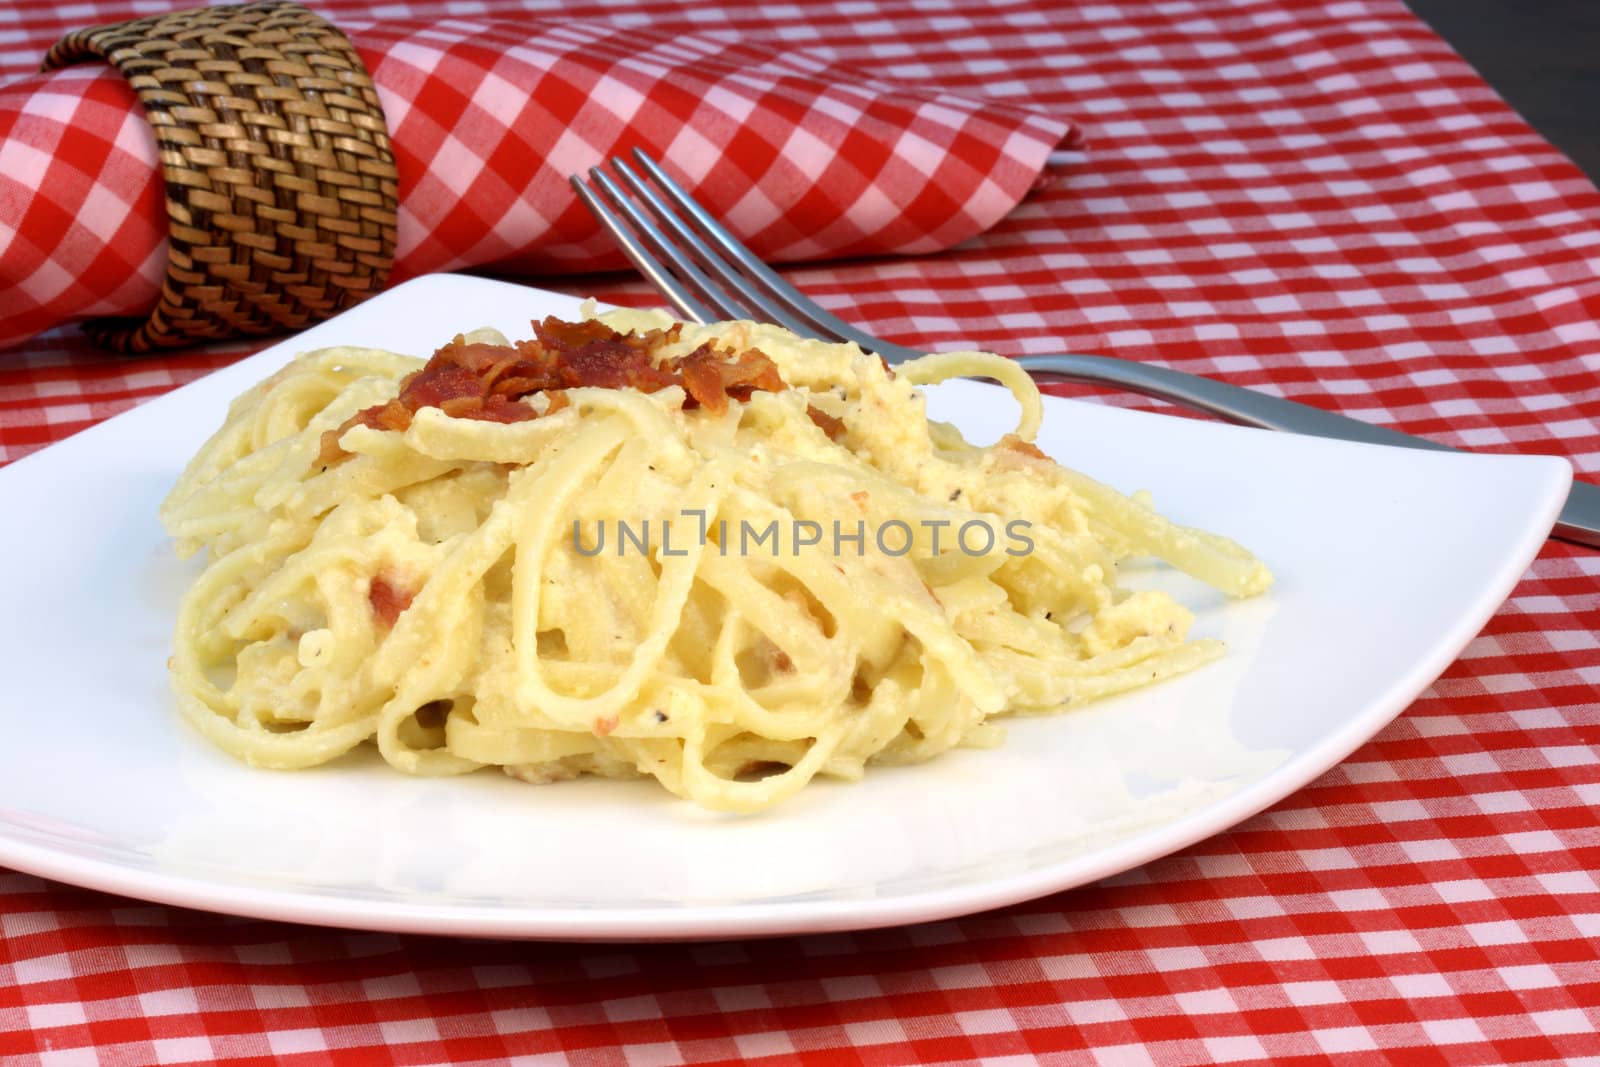 Gourmet exquisite carbonara pasta plate made with fancy organic bacon, eggs, heavy cream, and  parmesan cheese  